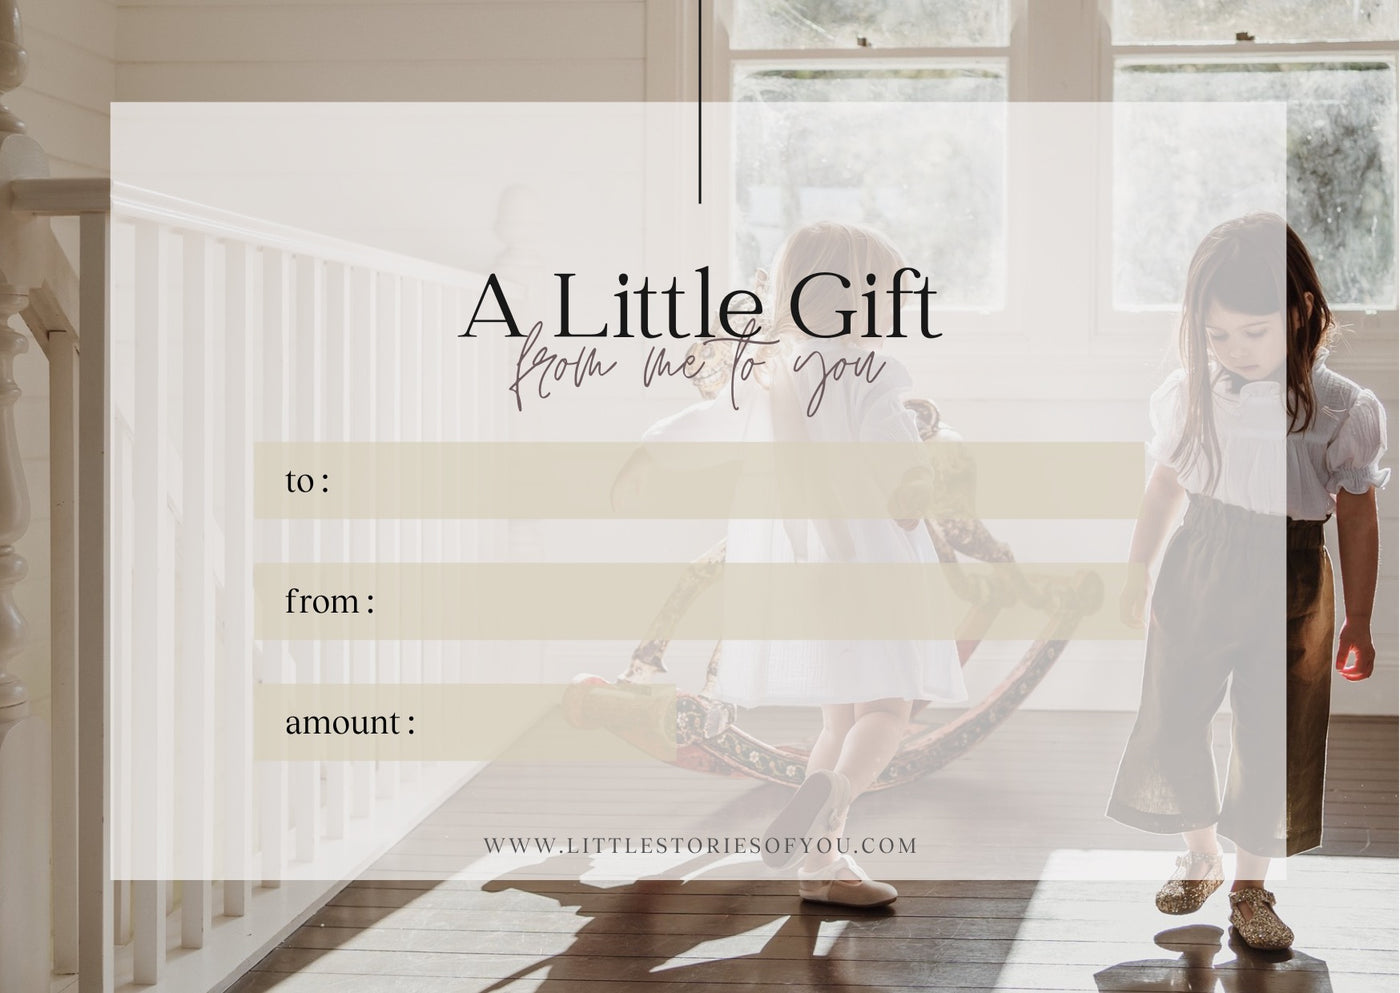 Little Stories of you Gift Card